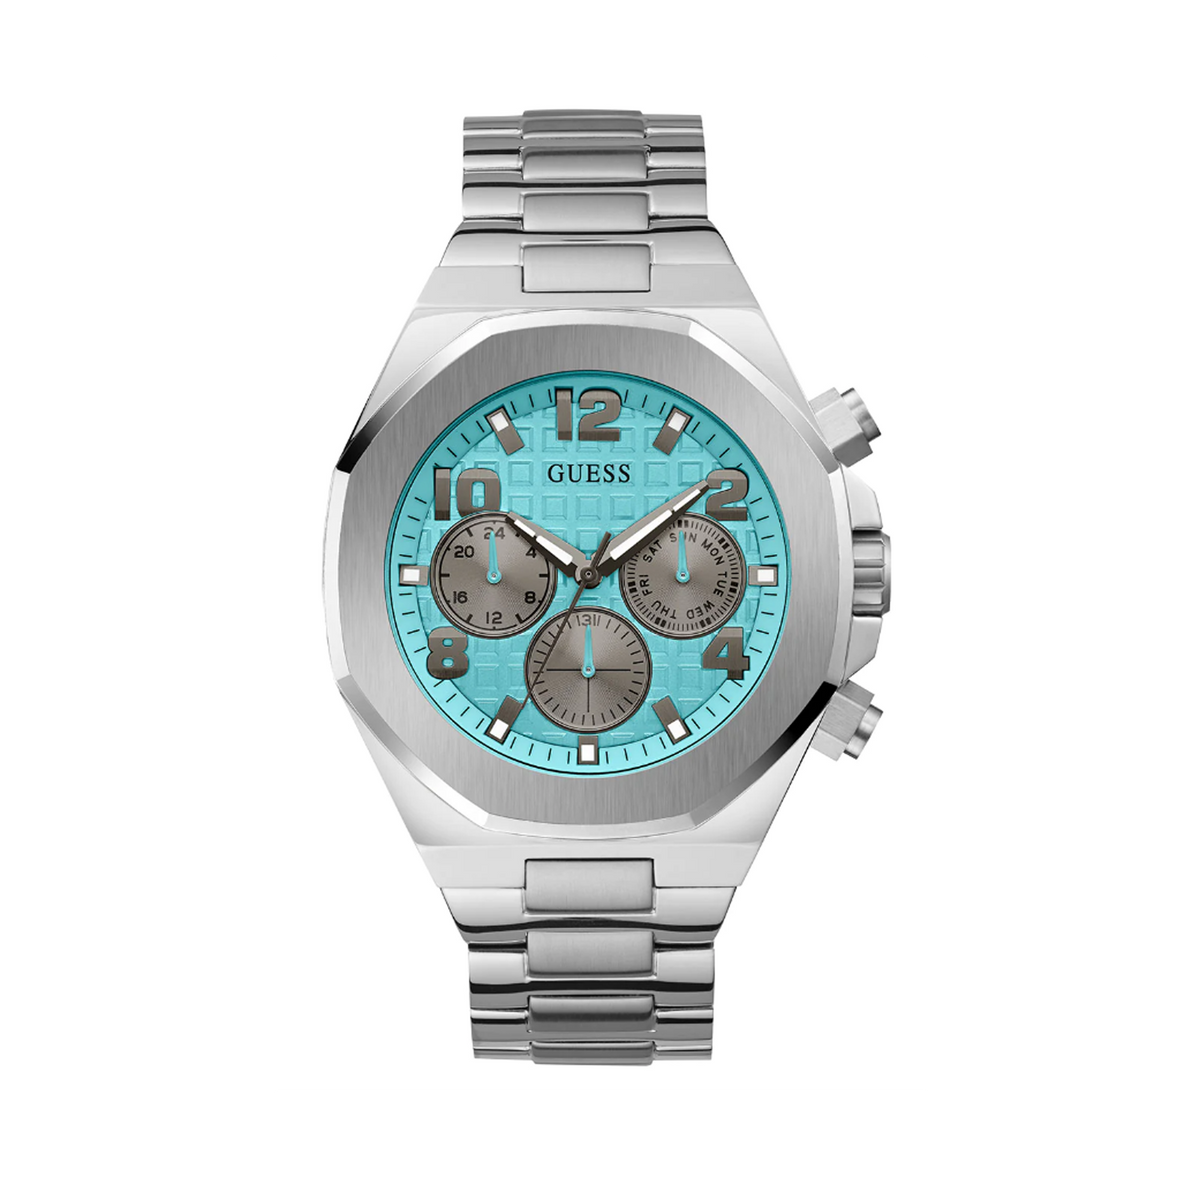 Guess Men's 46.00mm Silver Tone Multi-function Watch